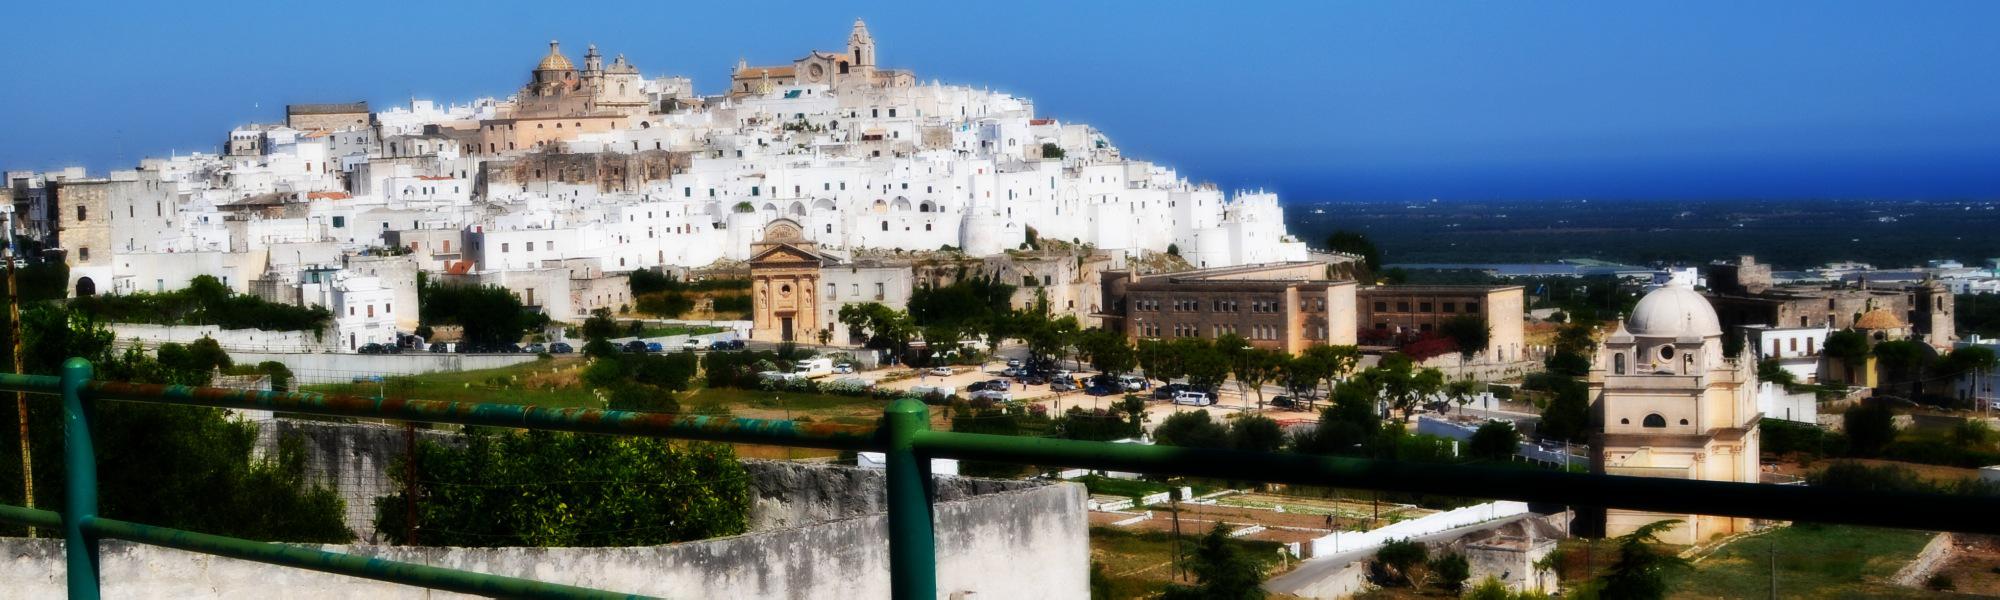 Best things to see and monuments in Ostuni, Puglia - Agriturismo Masseria Salento 15